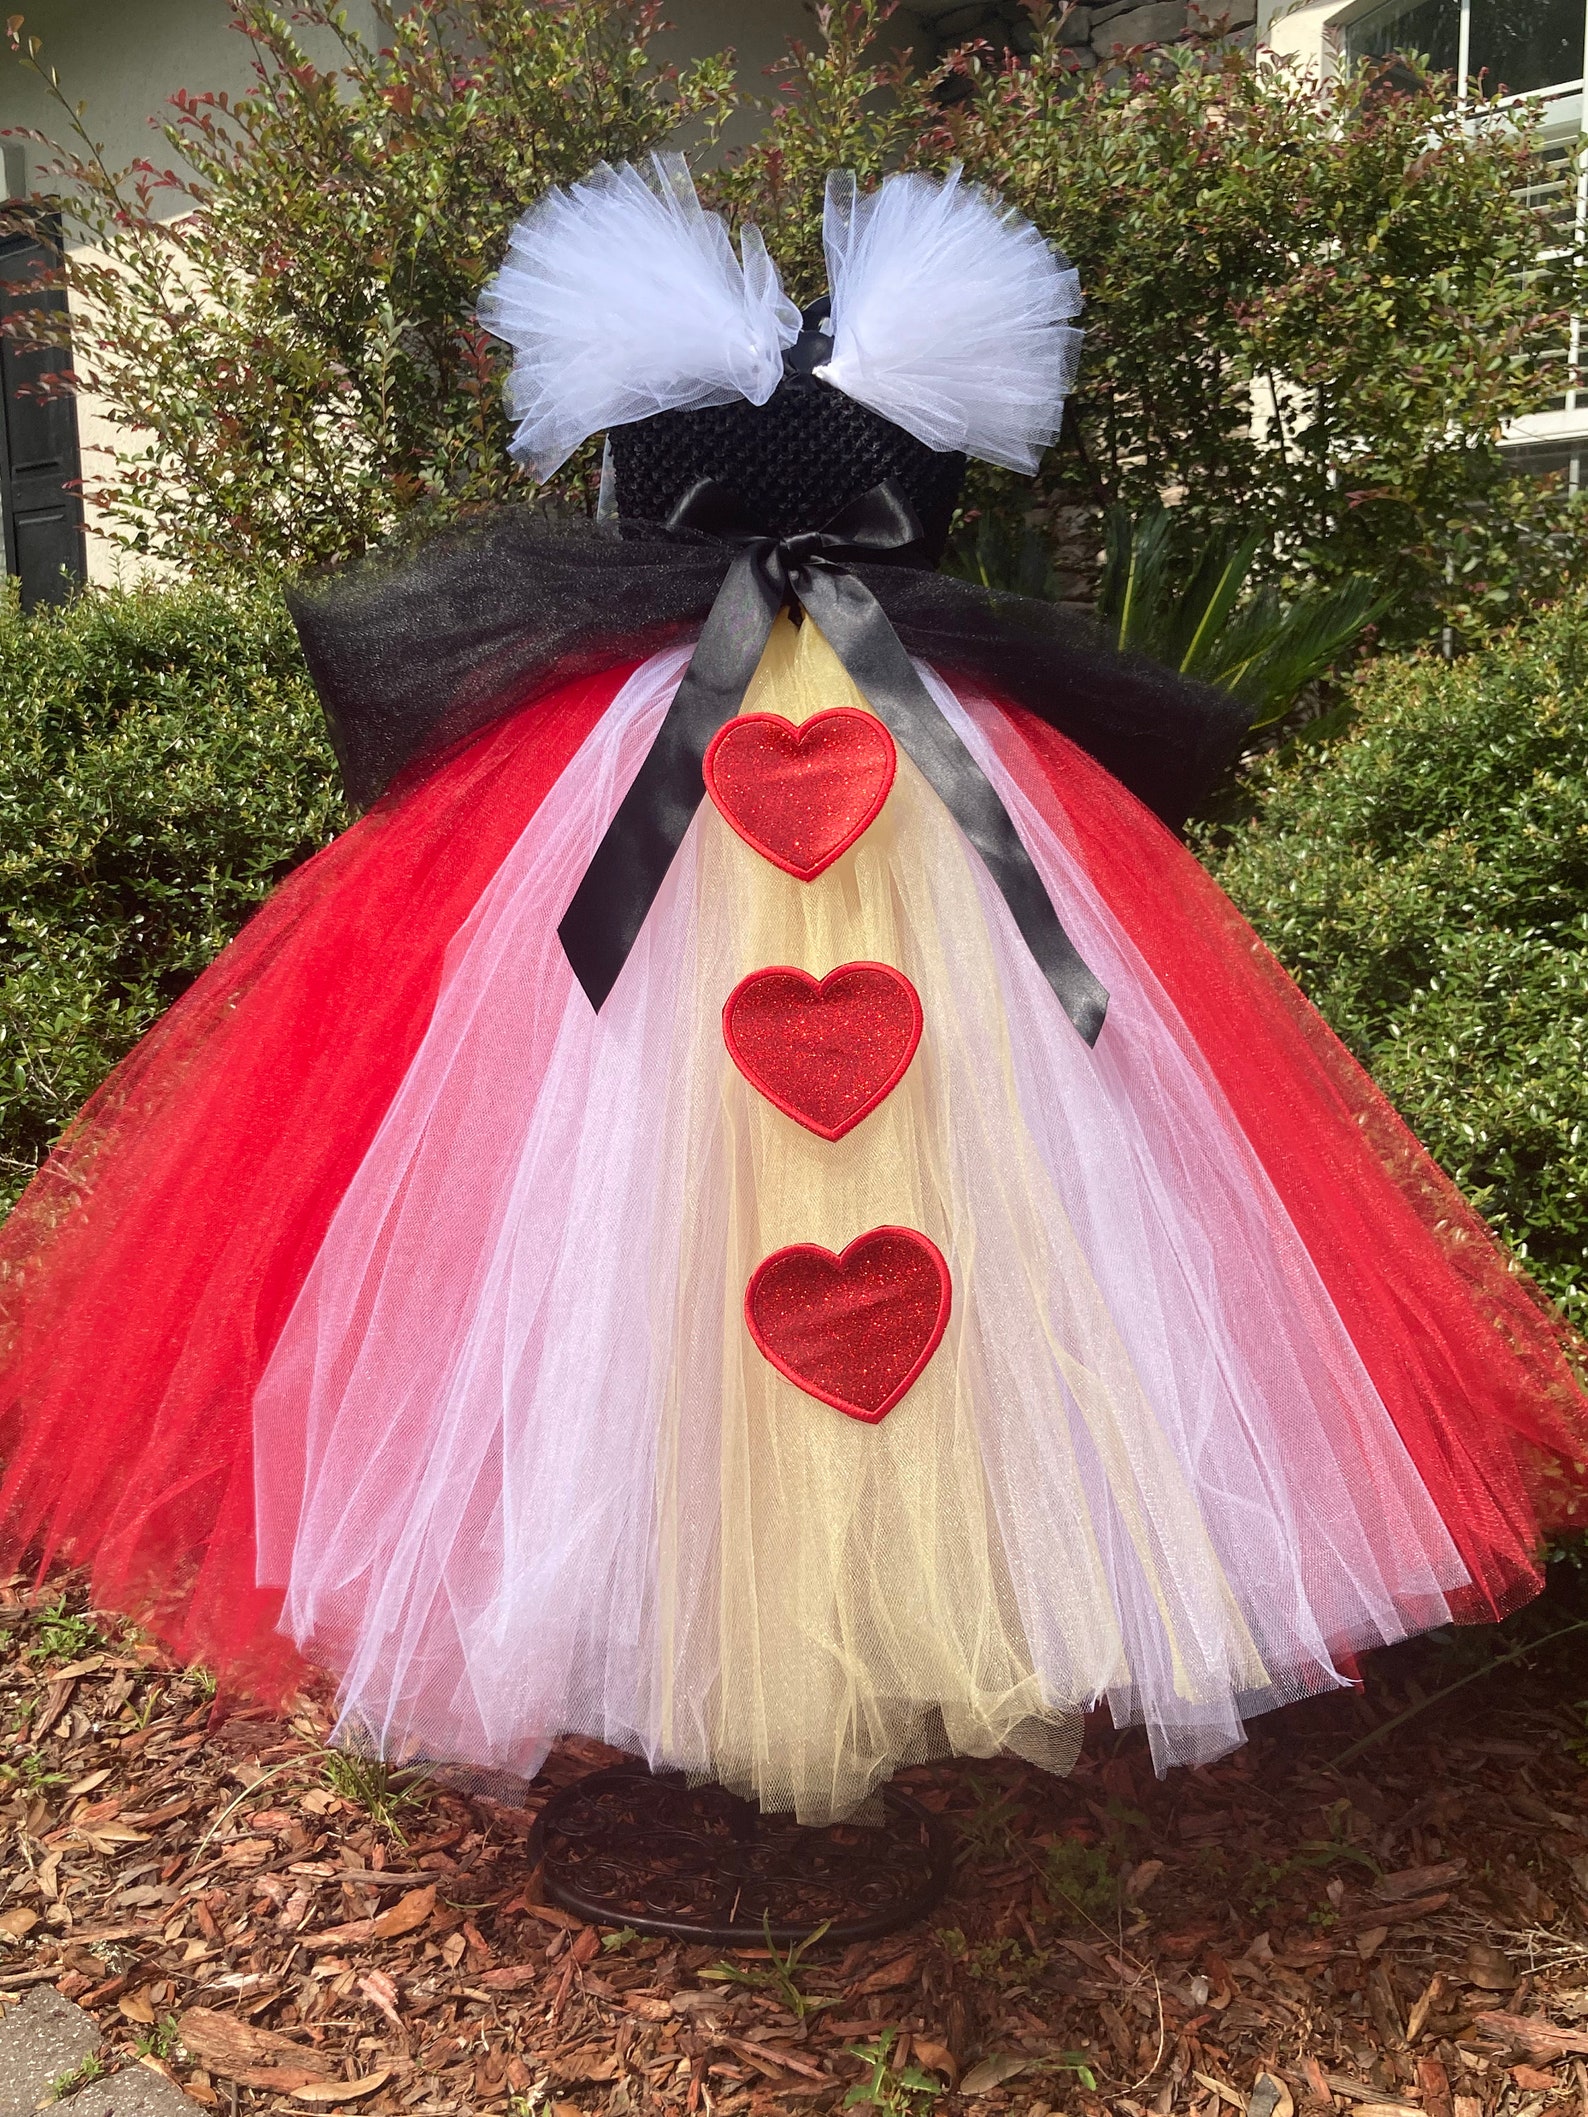 The Hair Bow Factory Queen of Hearts Tutu Dress Size 12-24 - Etsy